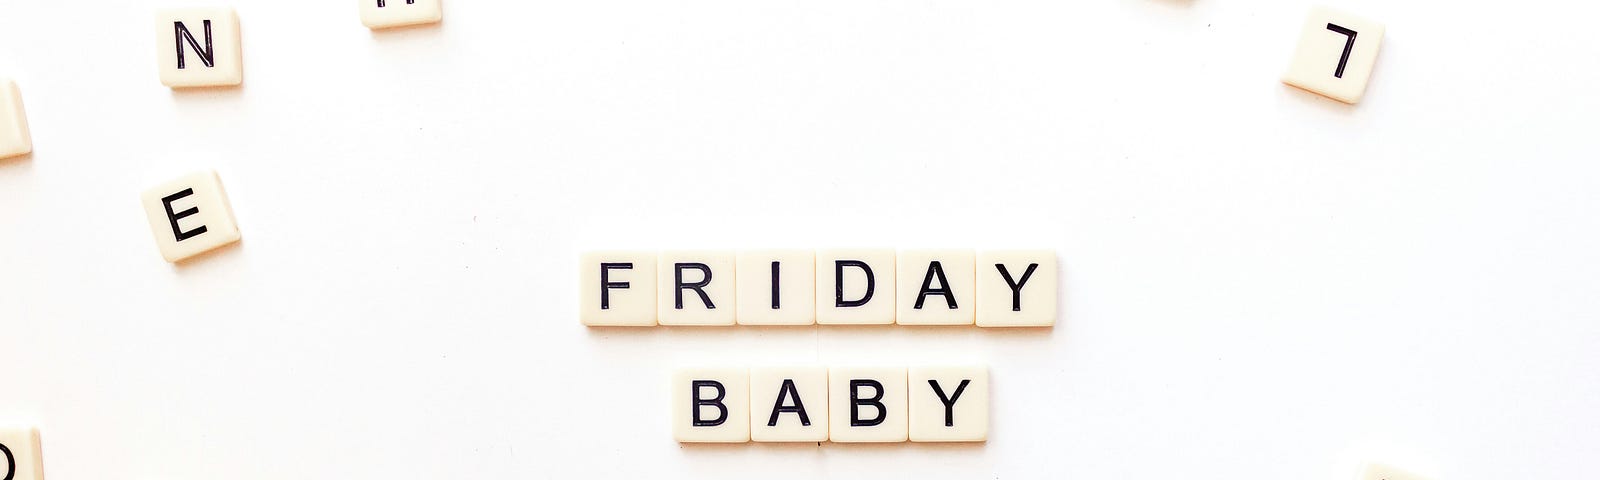 Image with “Friday Baby” on it